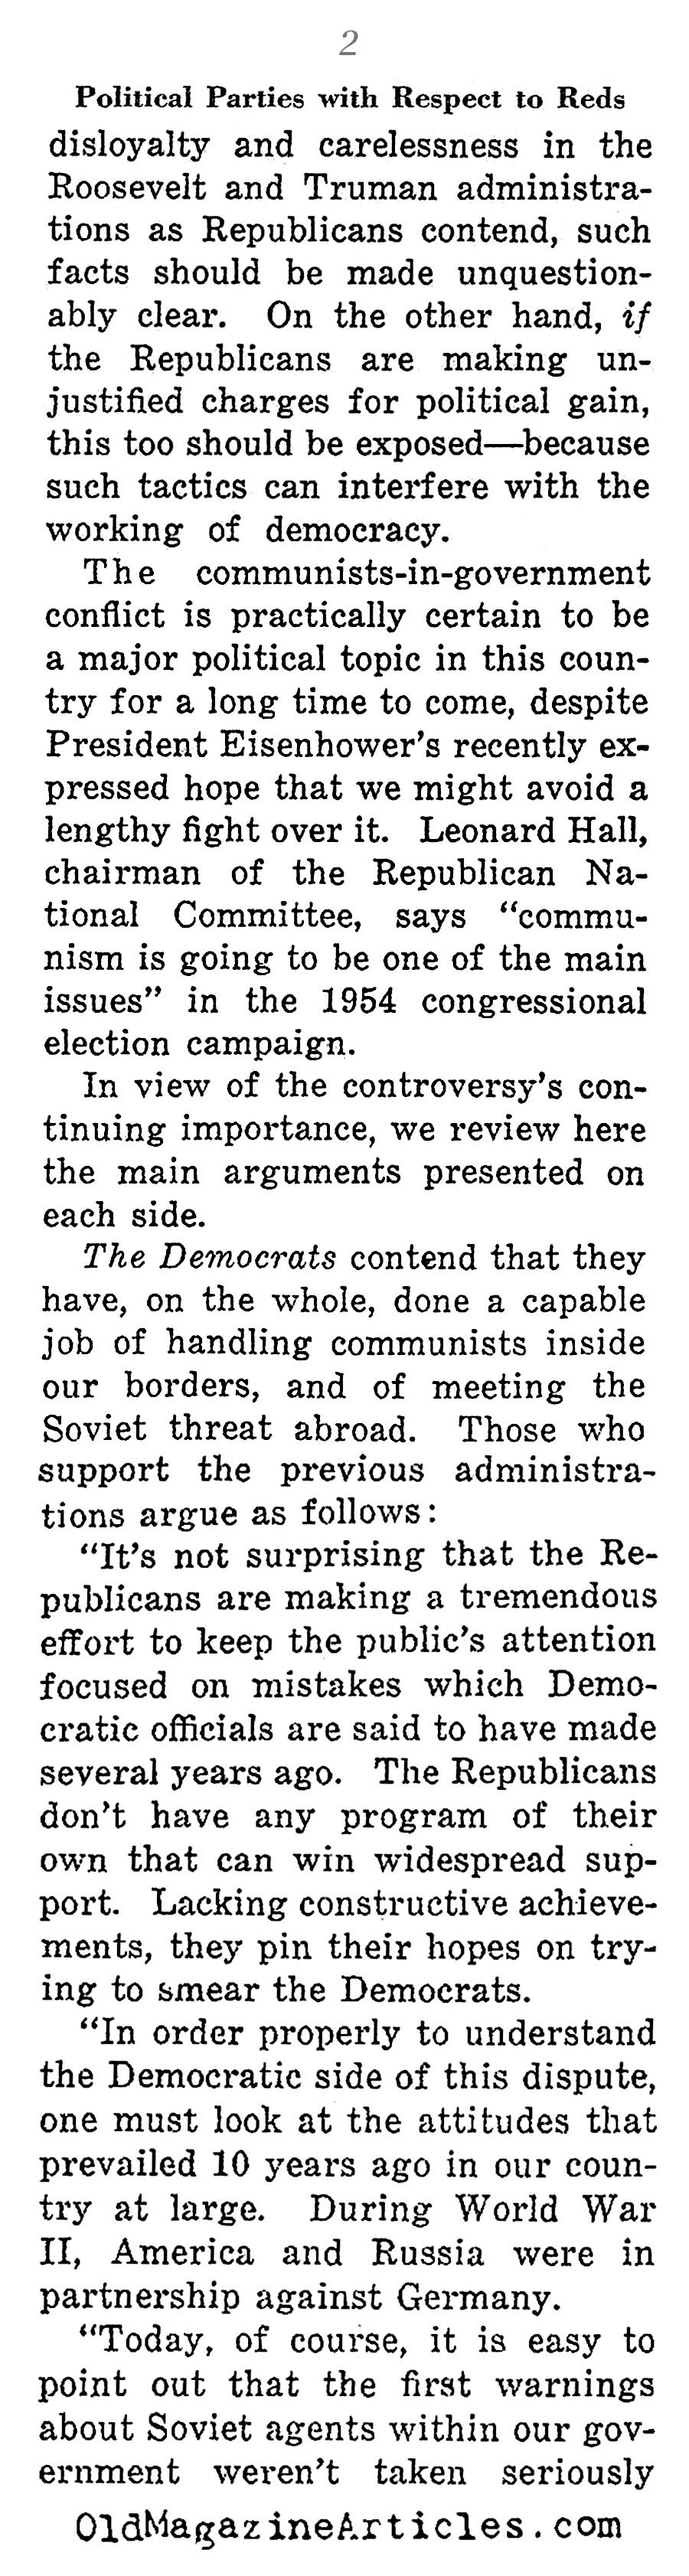 Reds in the Government (Weekly News Review, 1953)